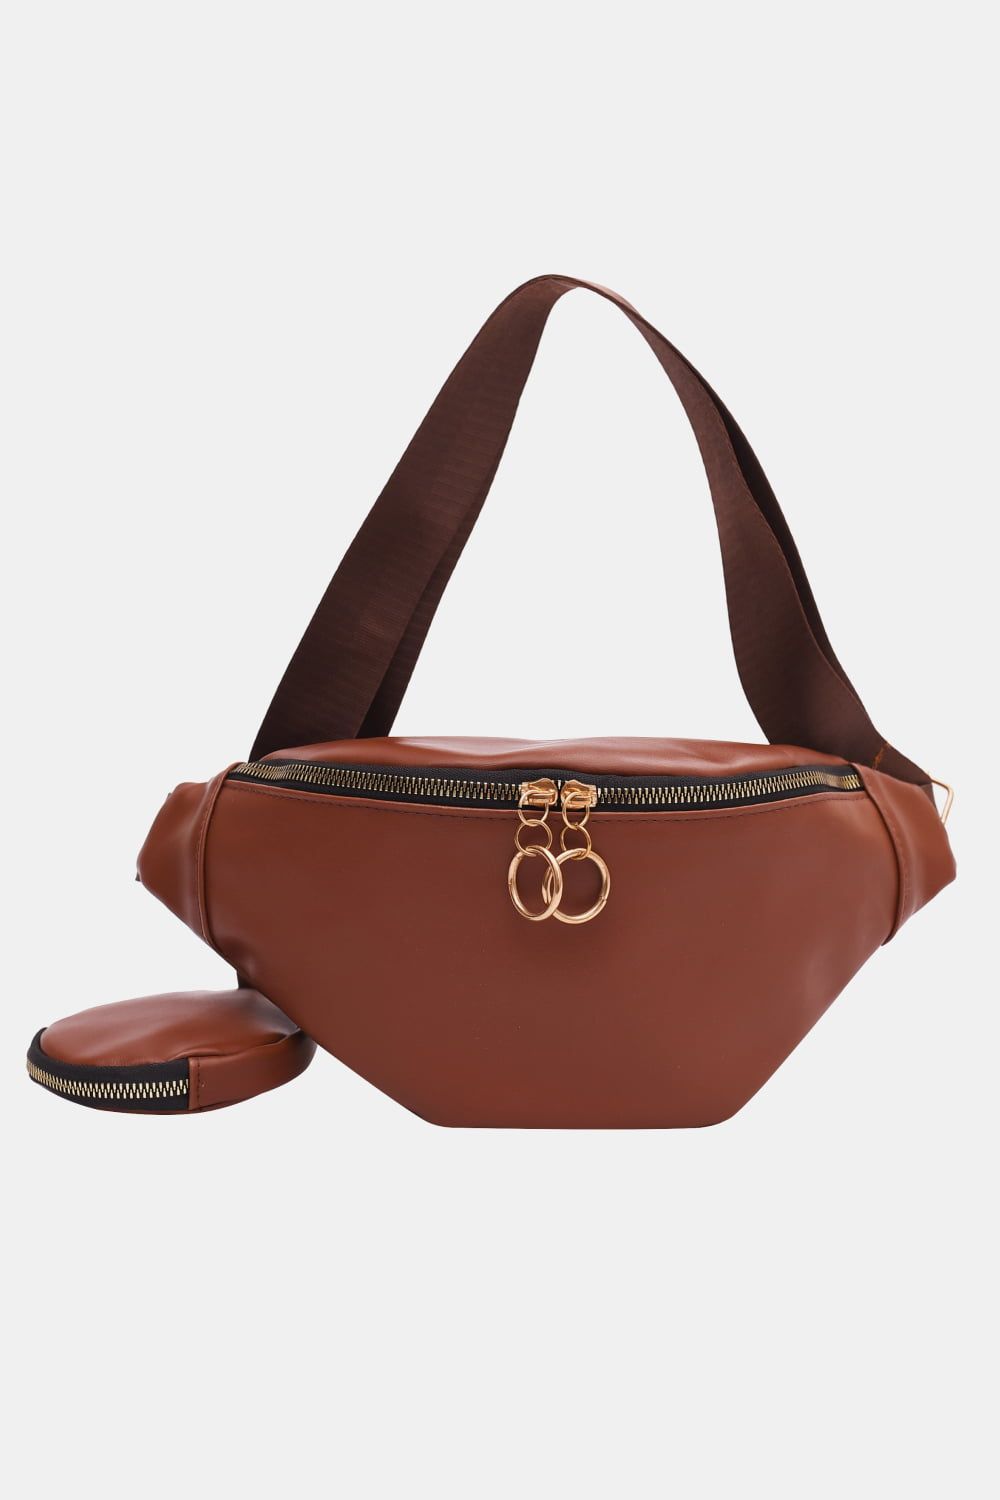 PU Leather Sling Bag with Small Purse.